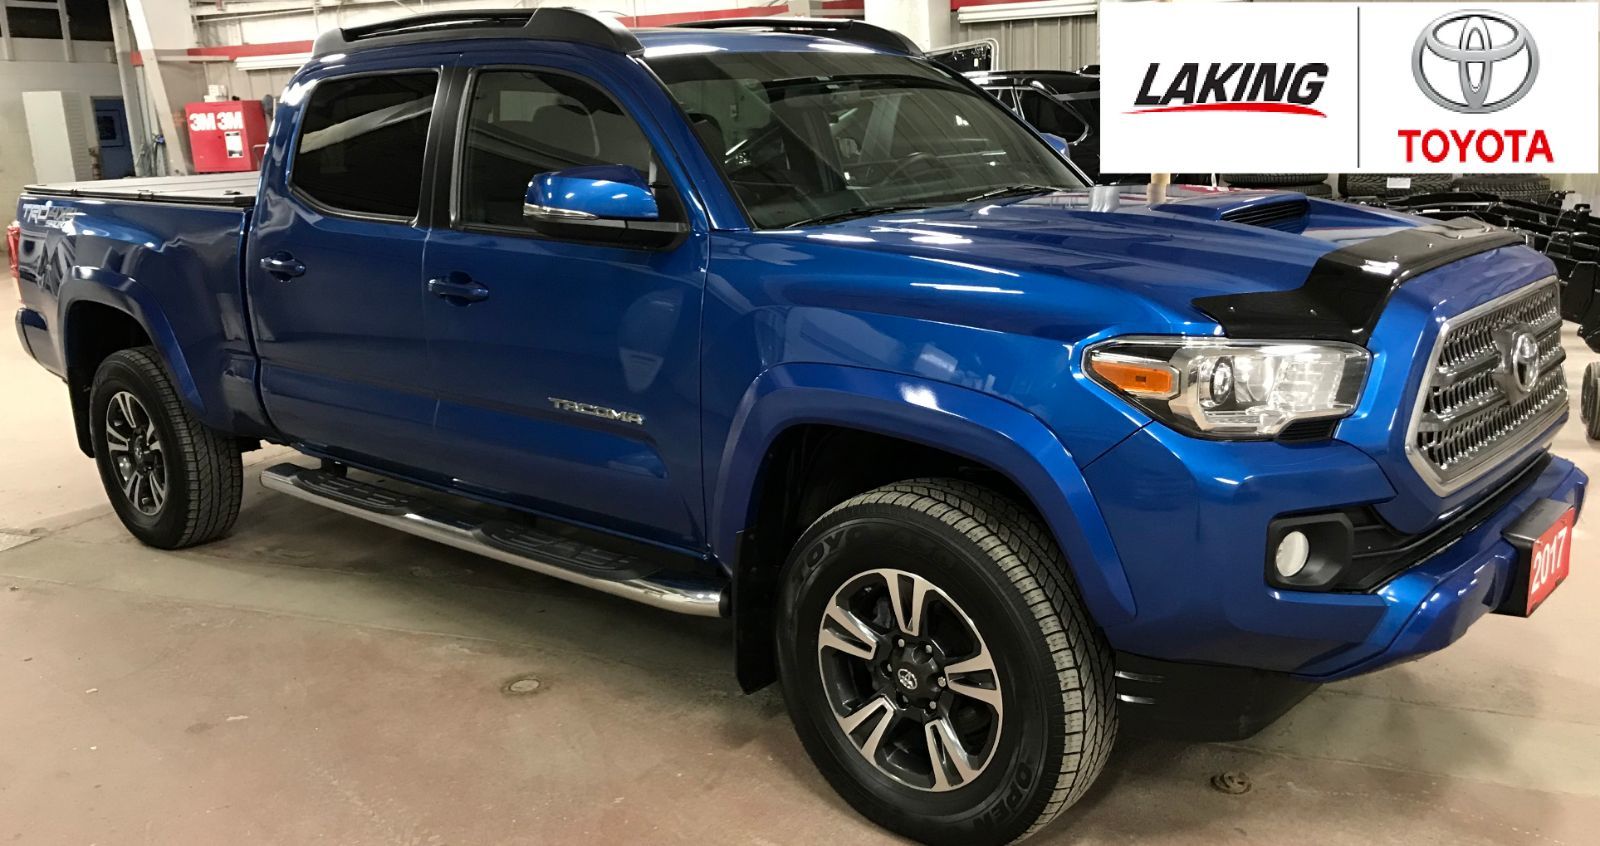 Used 2017 Toyota Tacoma TRD SPORT 4X4 DOUBLE CAB AWESOME TRUCK in